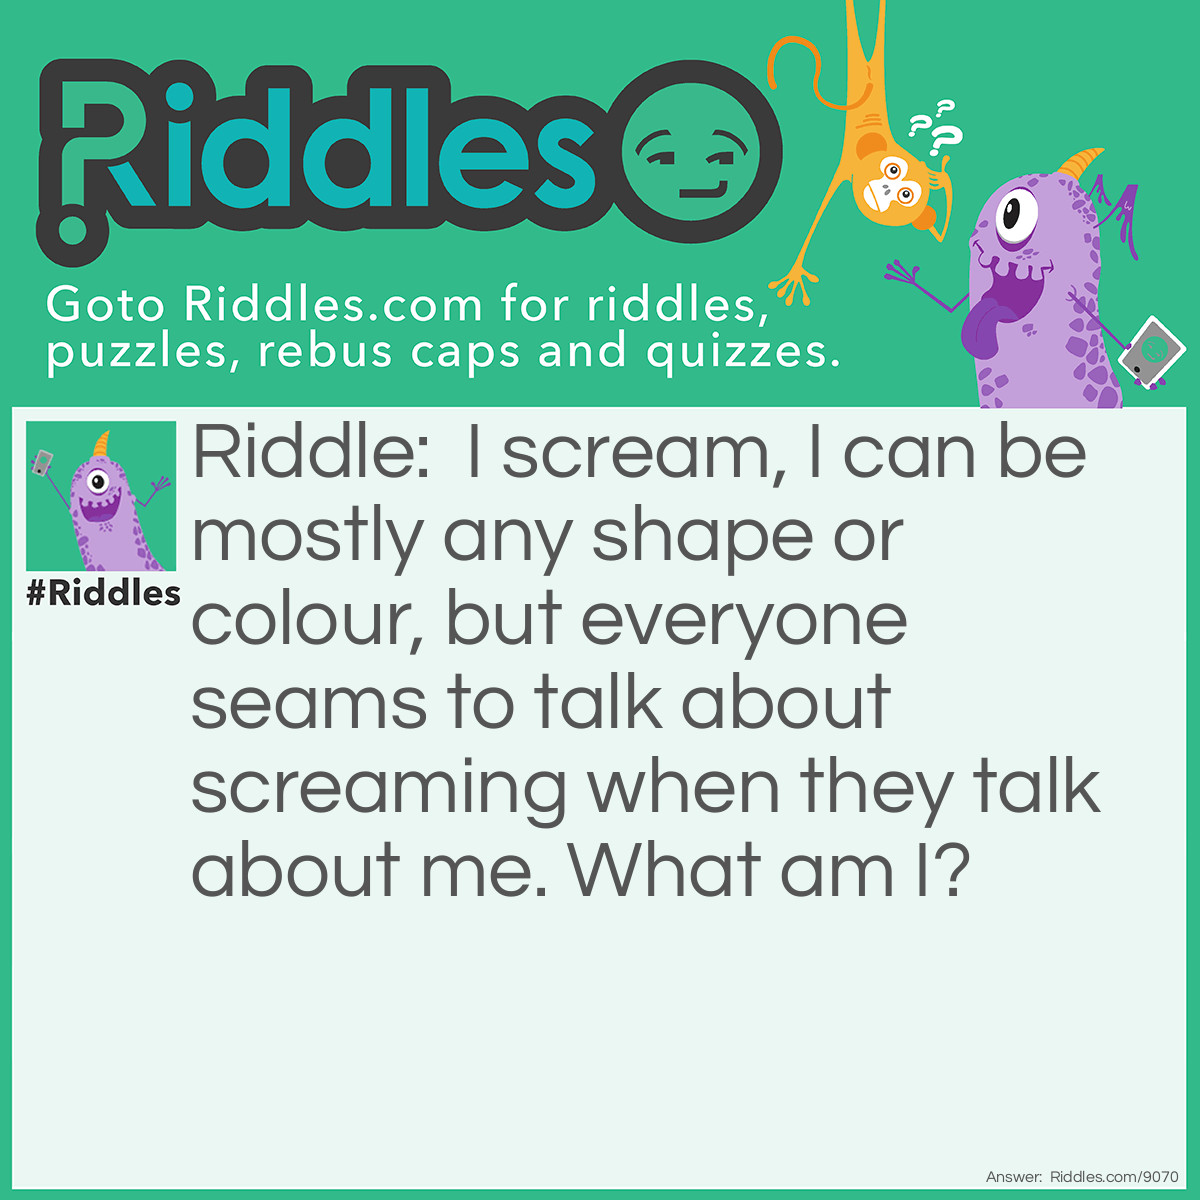 Riddle: I scream, I can be mostly any shape or colour, but everyone seams to talk about screaming when they talk about me. What am I? Answer: An Ice Cream.